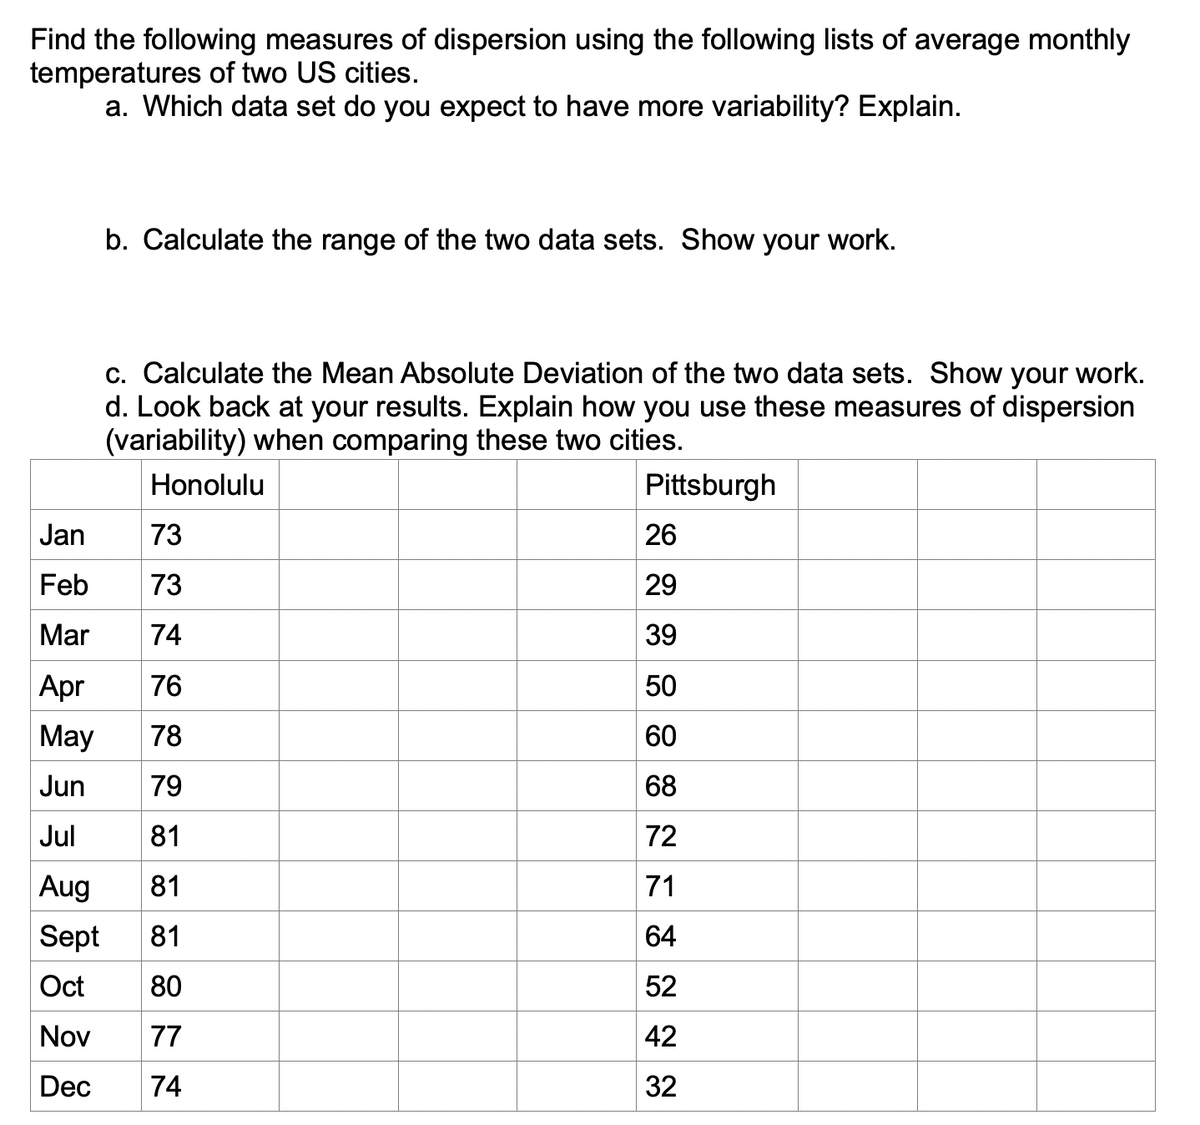 Find the following measures of dispersion using the following lists of average monthly
temperatures of two US cities.
a. Which data set do you expect to have more variability? Explain.
b. Calculate the range of the two data sets. Show your work.
c. Calculate the Mean Absolute Deviation of the two data sets. Show your work.
d. Look back at your results. Explain how you use these measures of dispersion
(variability) when comparing these two cities.
Honolulu
Pittsburgh
Jan
73
26
Feb
73
29
Mar
74
39
Apr
76
50
May
78
60
Jun
79
68
Jul
81
72
Aug
81
71
Sept
81
64
Oct
80
52
Nov
77
42
Dec
74
32
